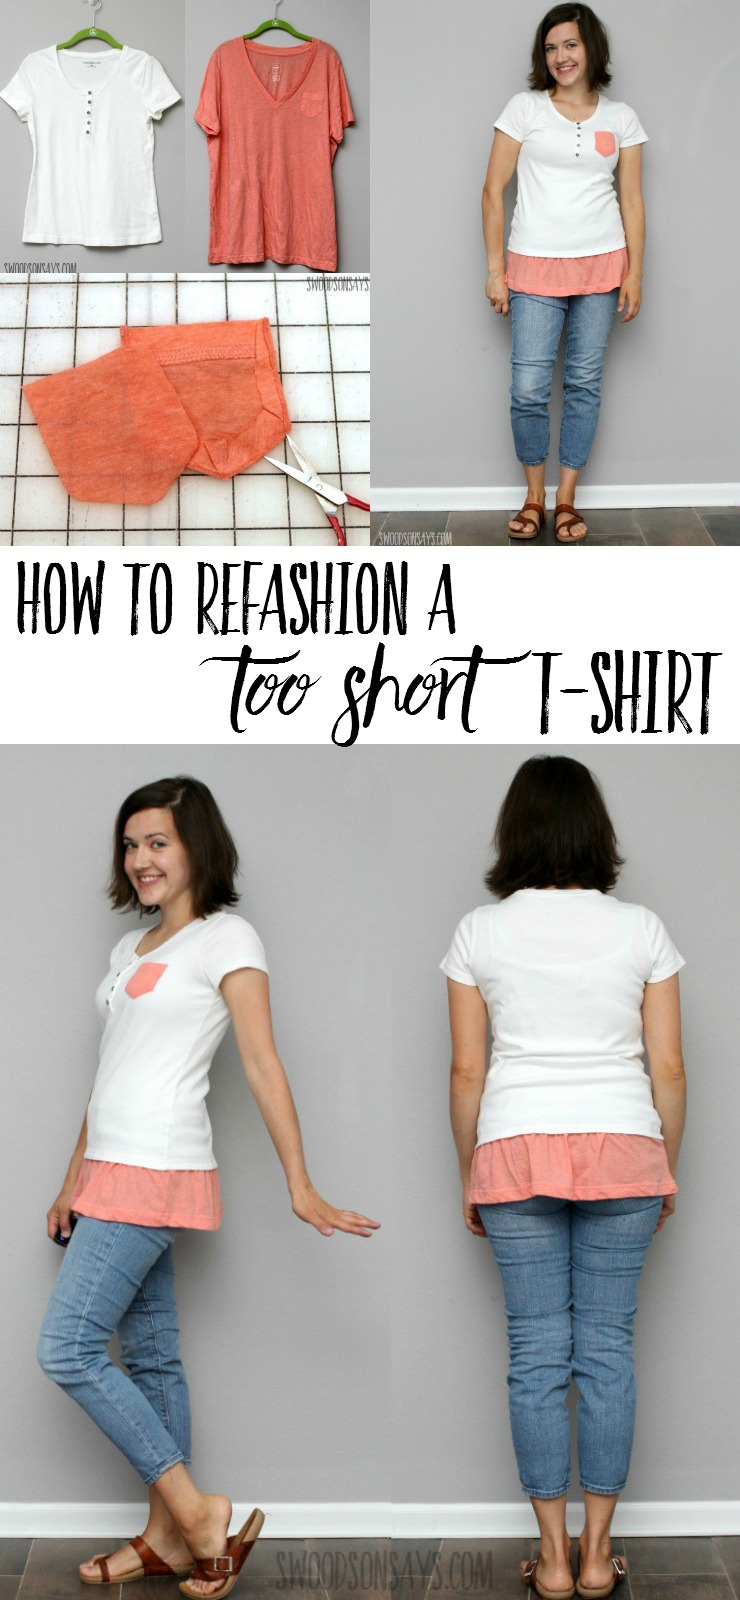 See how to refashion a tshirt that is too short! This easy tshirt refashion idea combines too looks for a fresh new take. 